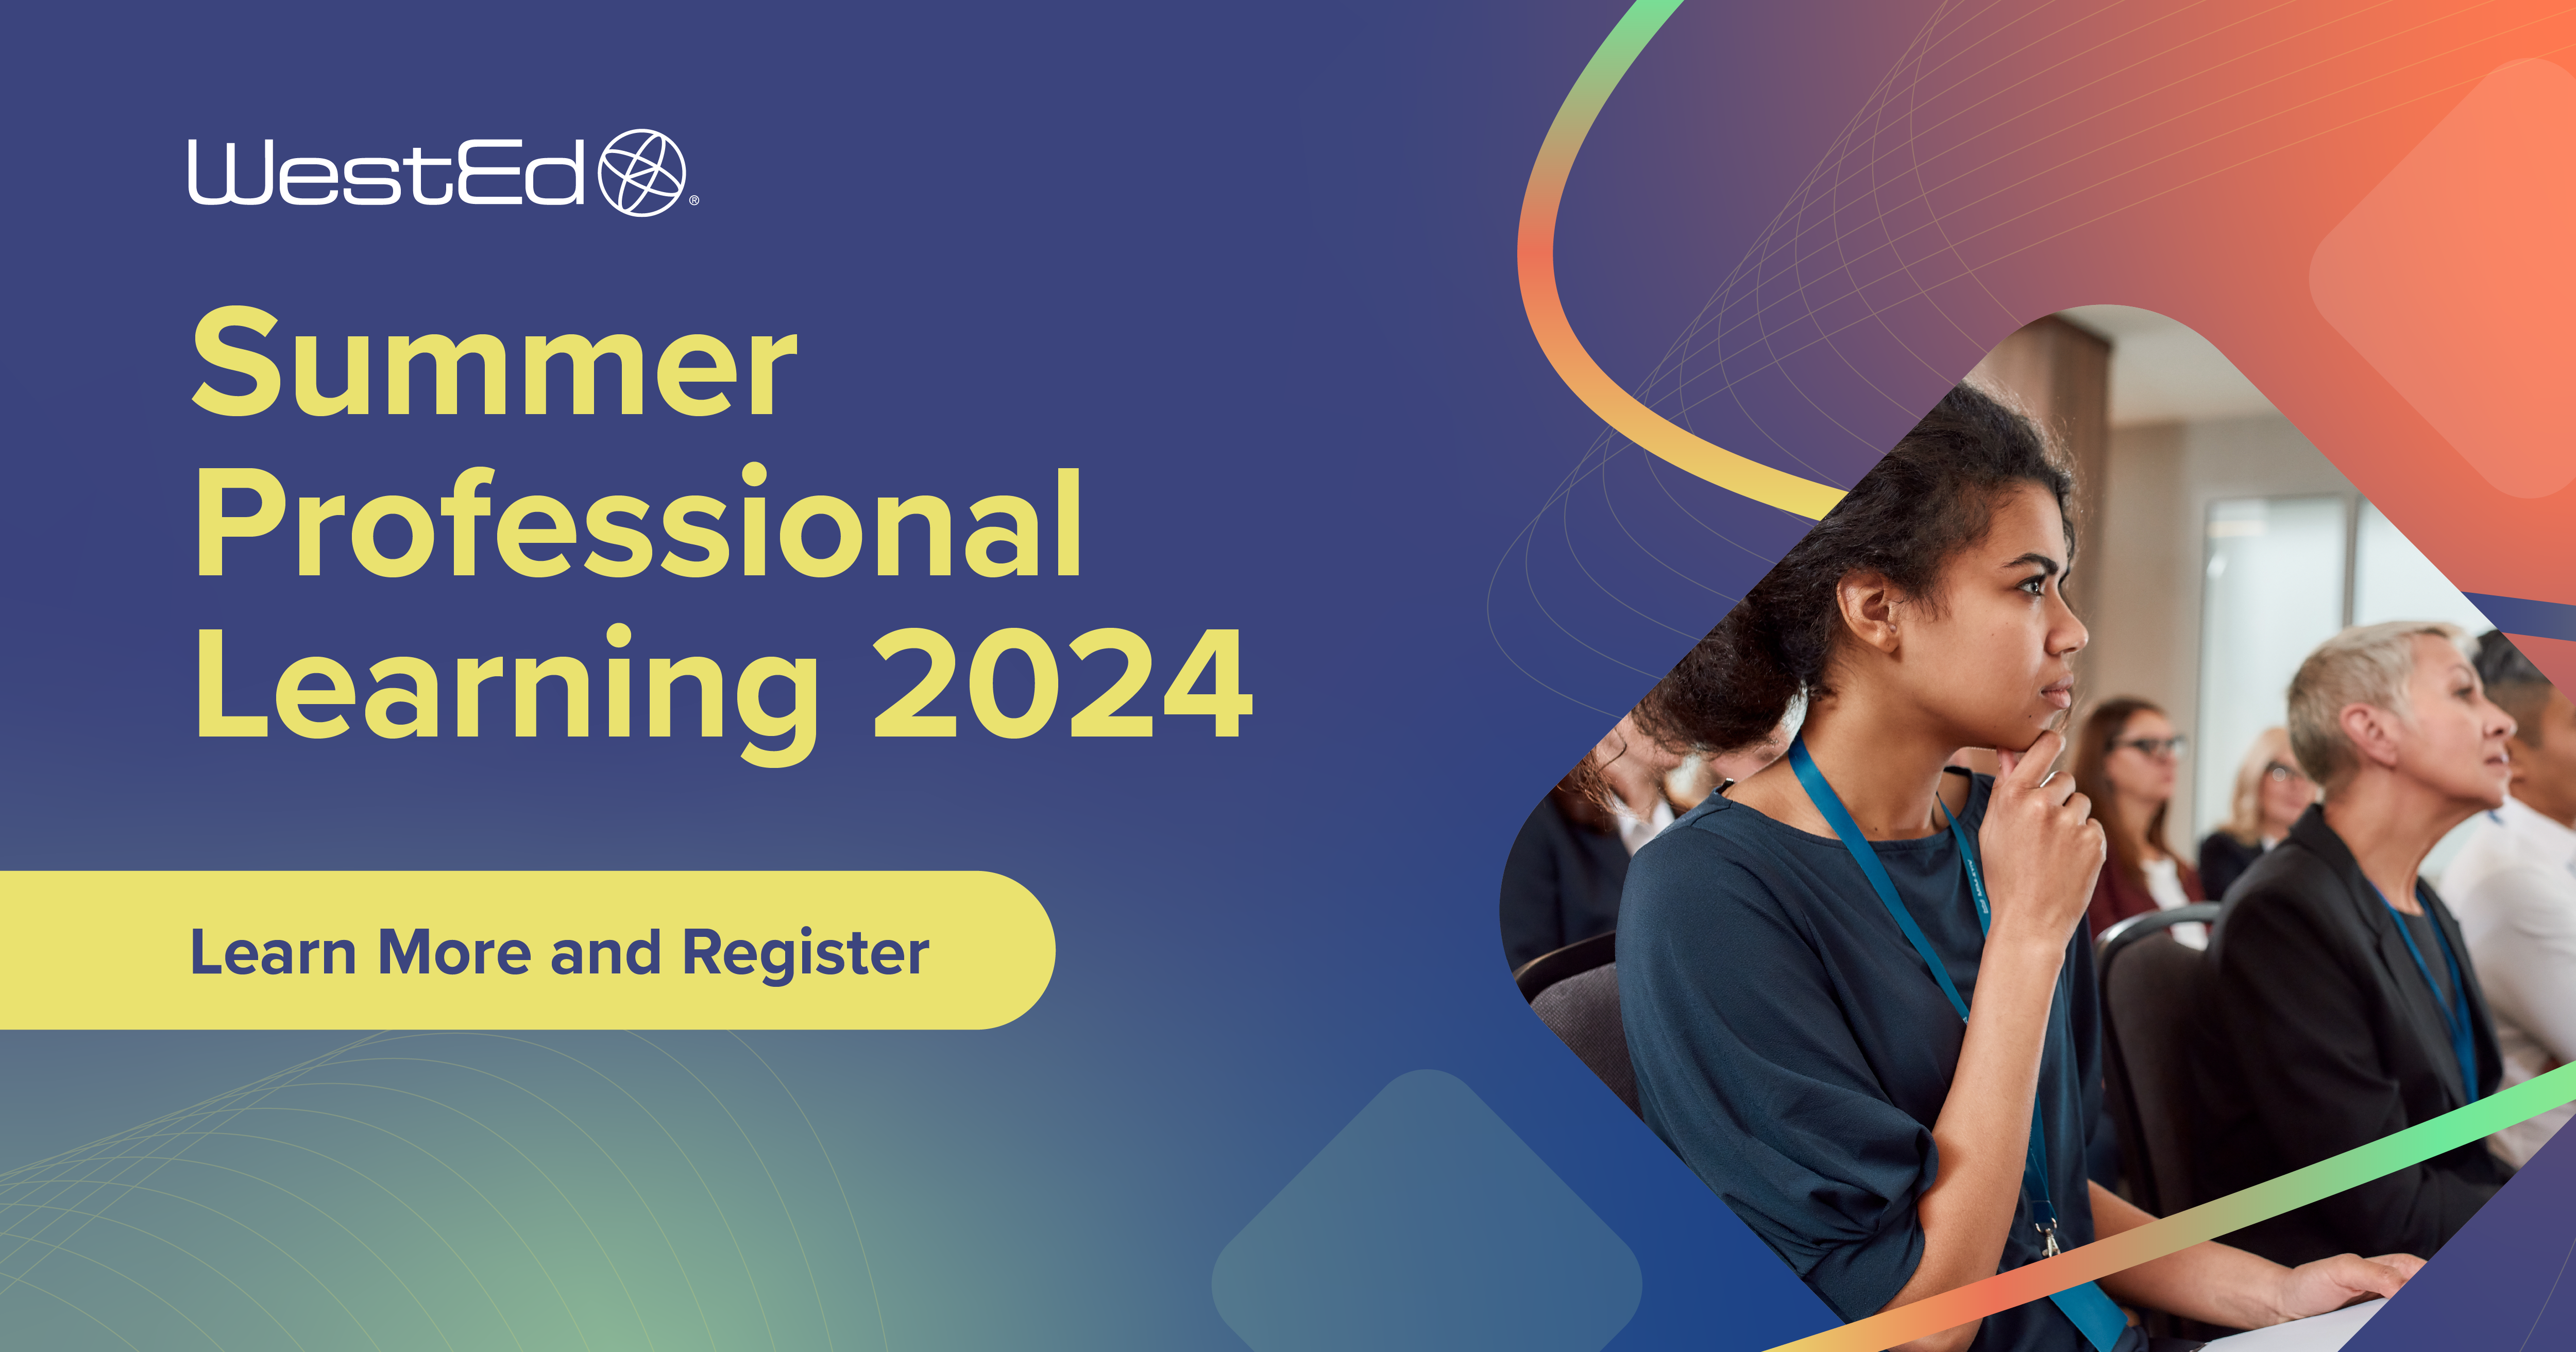 Summer Professional Learning 2024